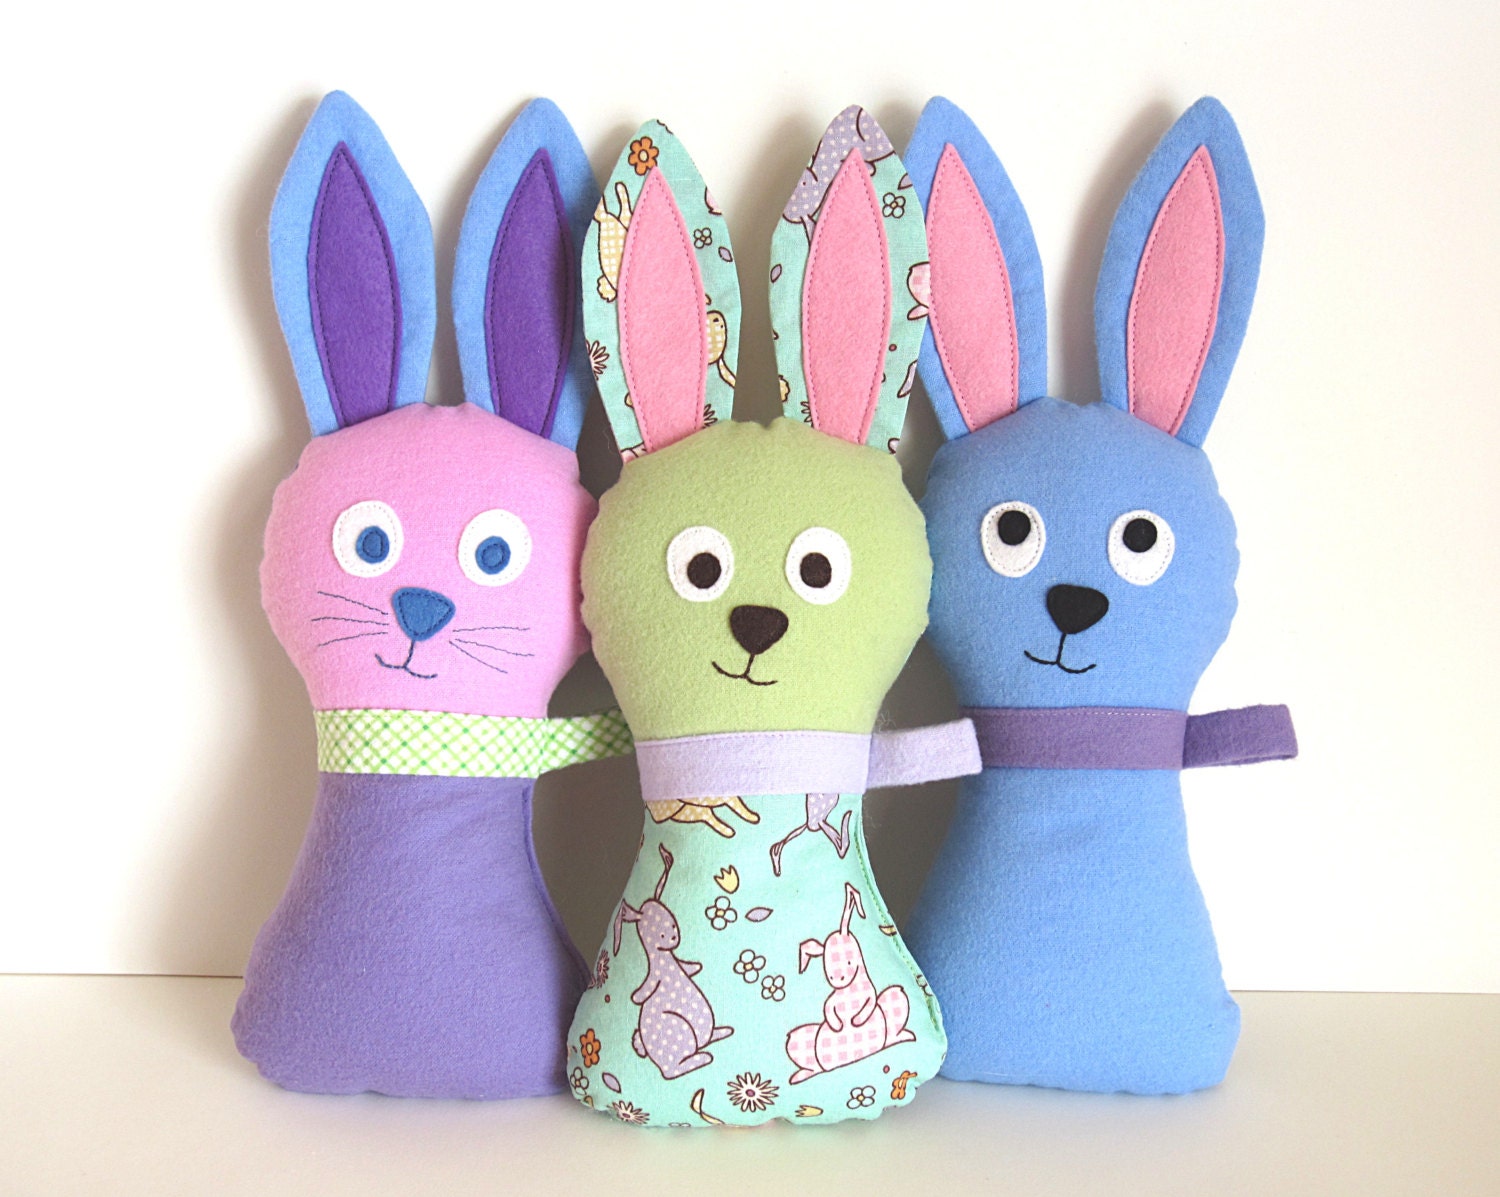 Stuffed Bunny Pattern - Hoppy Loppy PDF Sewing Pattern - Soft Toy Baby Plush DIY Easter Bunny for Springtime Peek-a-Boo Instant Download - MyFunnyBuddy